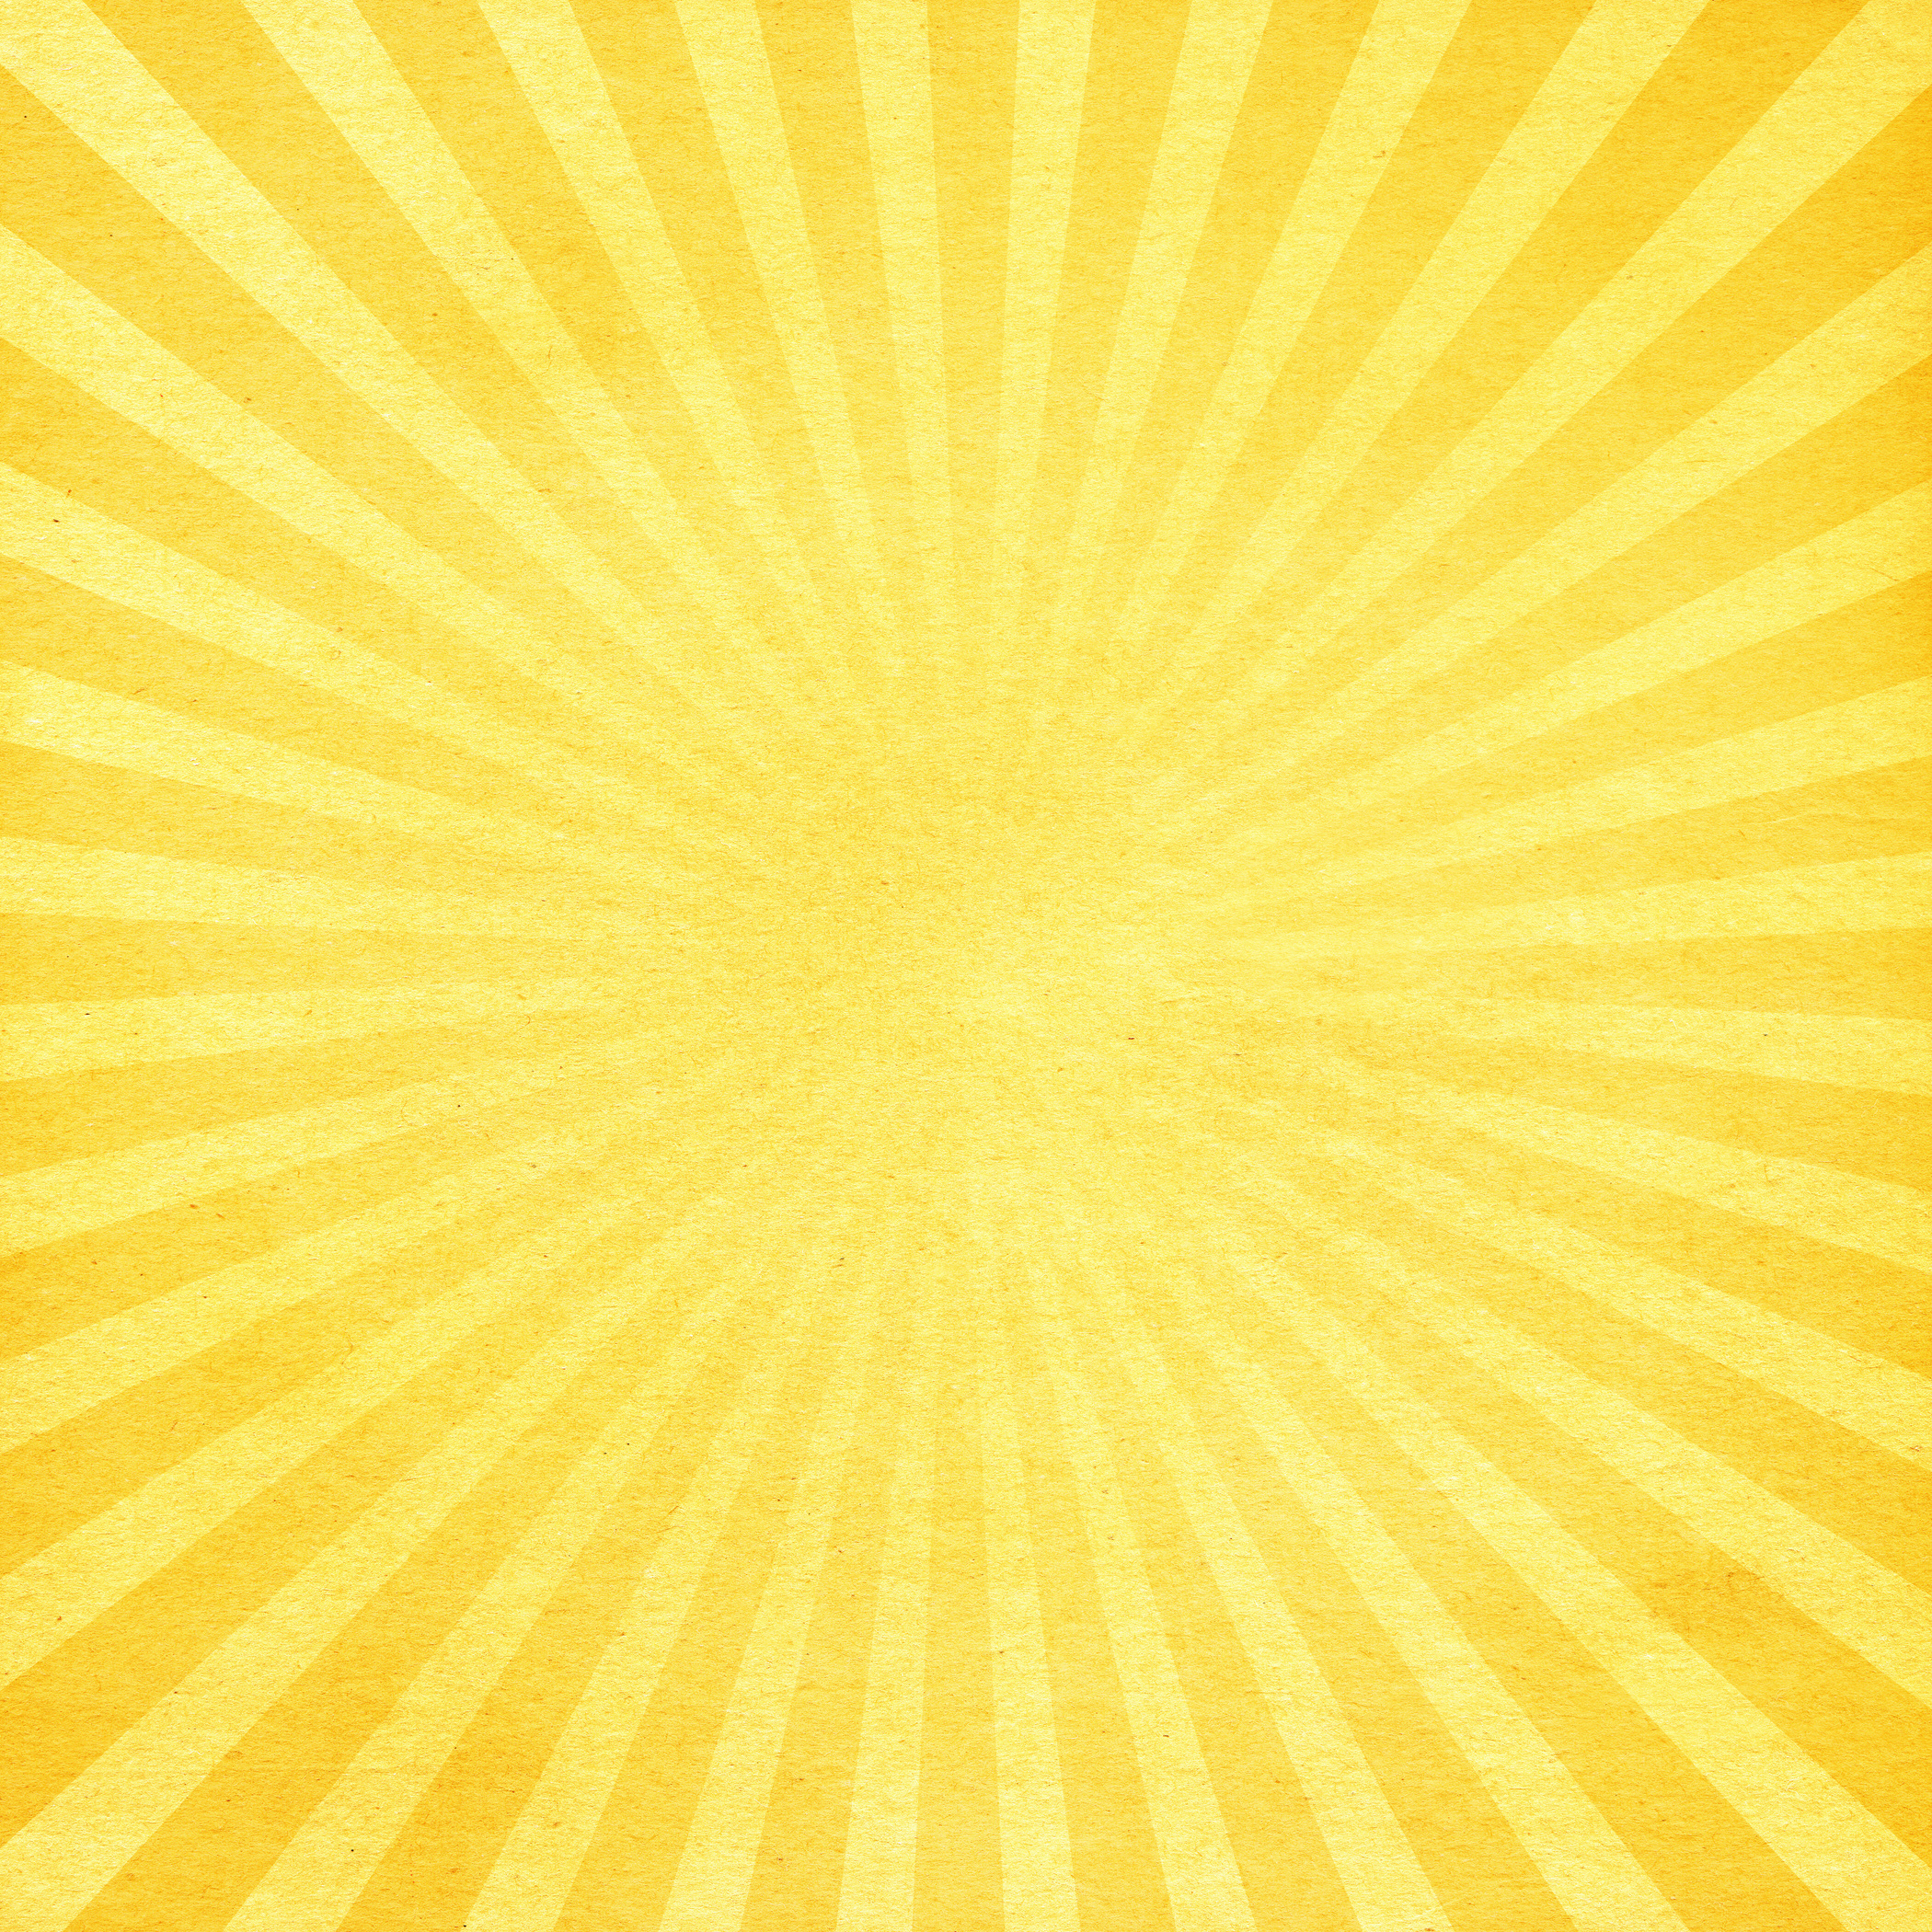 Yellow texture with sunbeam pattern background